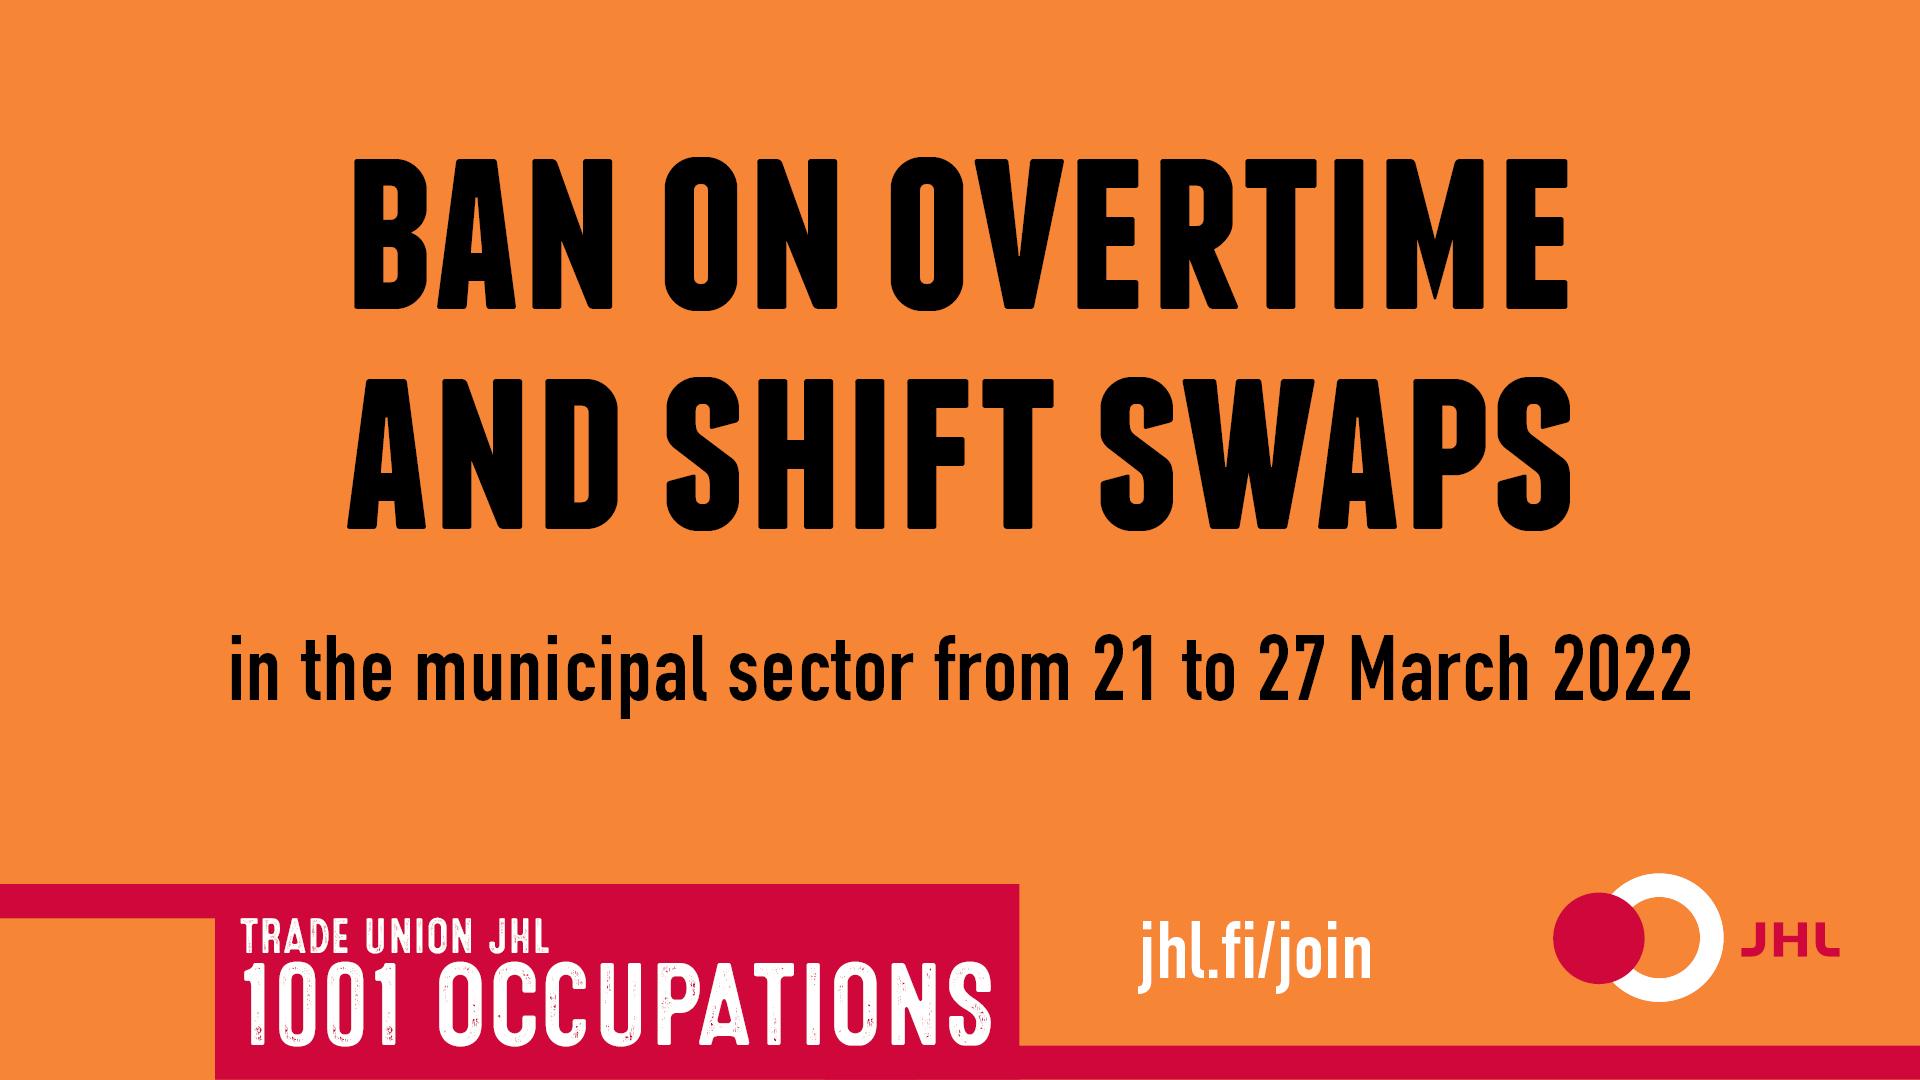 New ban on overtime and shift swaps for the municipal sector JHL member, here’s what you